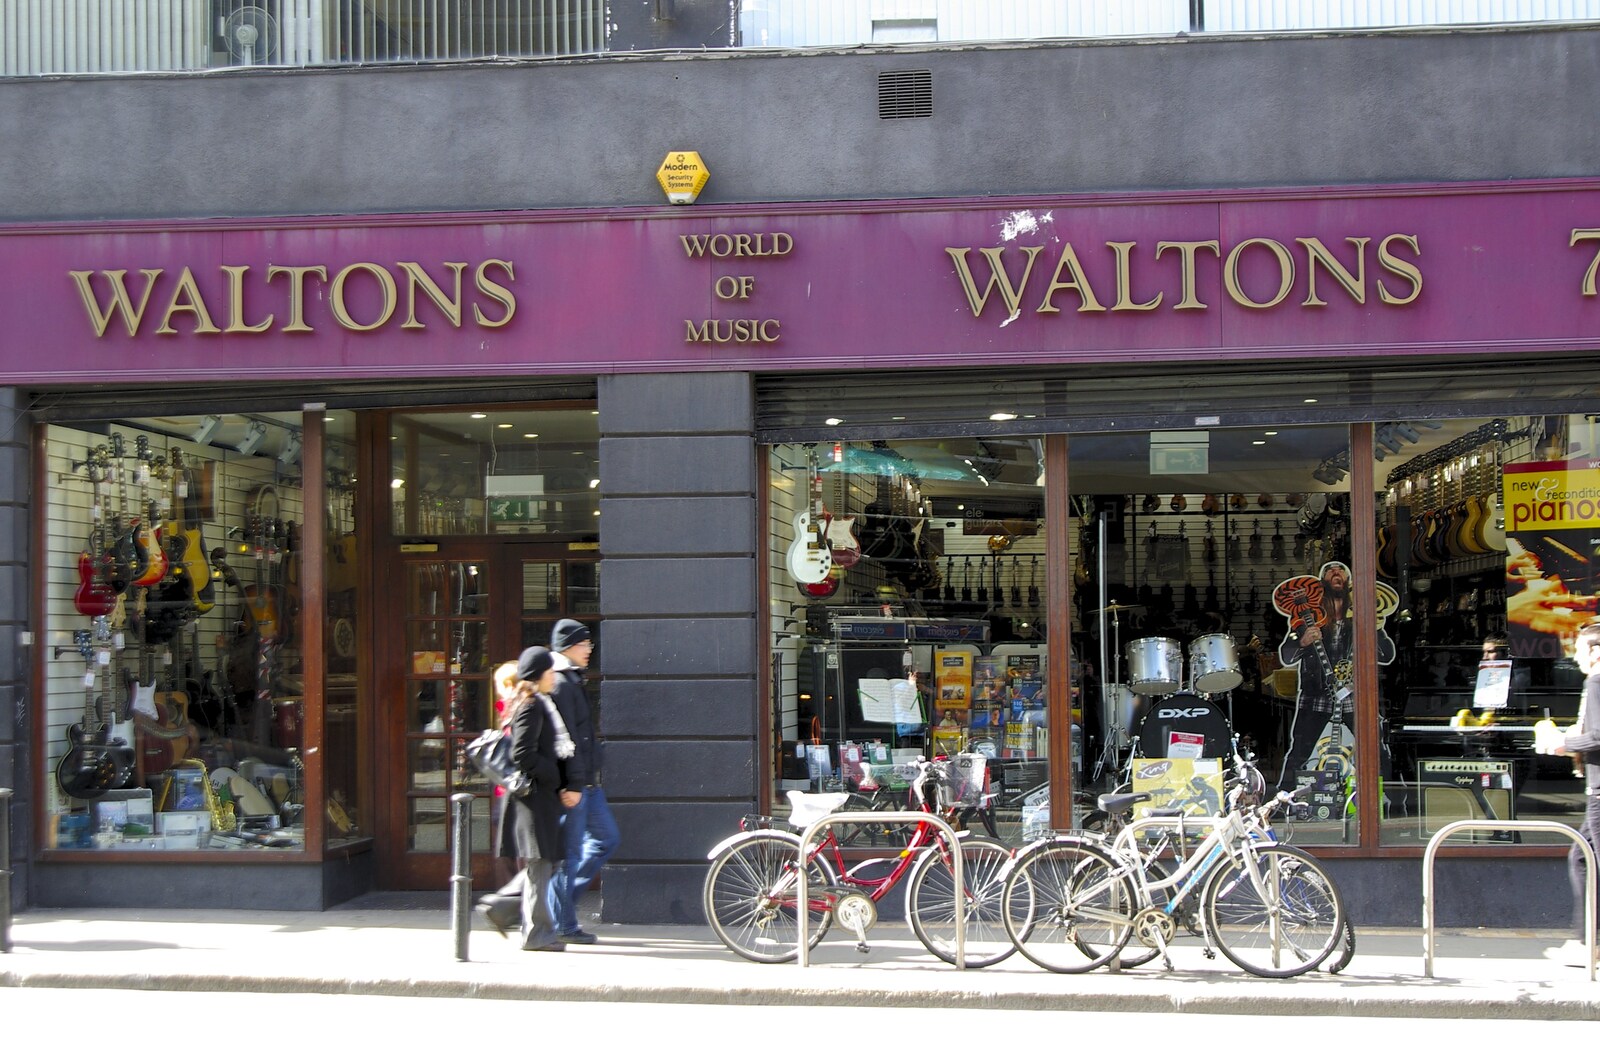 Walton's Music shop from Easter in Dublin, Ireland - 21st March 2008